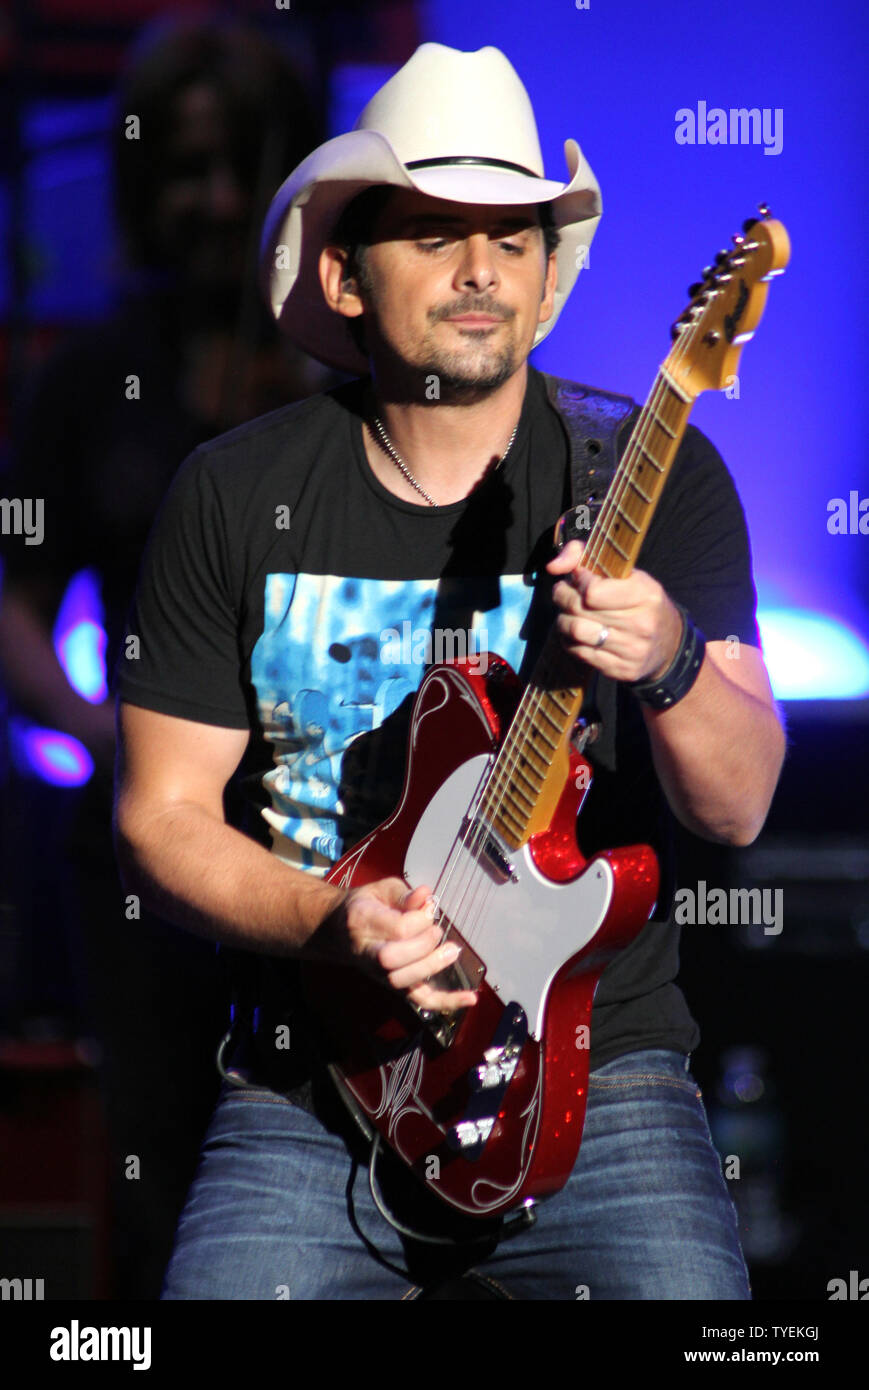 Brad Paisley performs in concert at the Cruzan Amphitheatre in West Palm Beach, Florida on August 16, 2014. UPI/Michael Bush Stock Photo